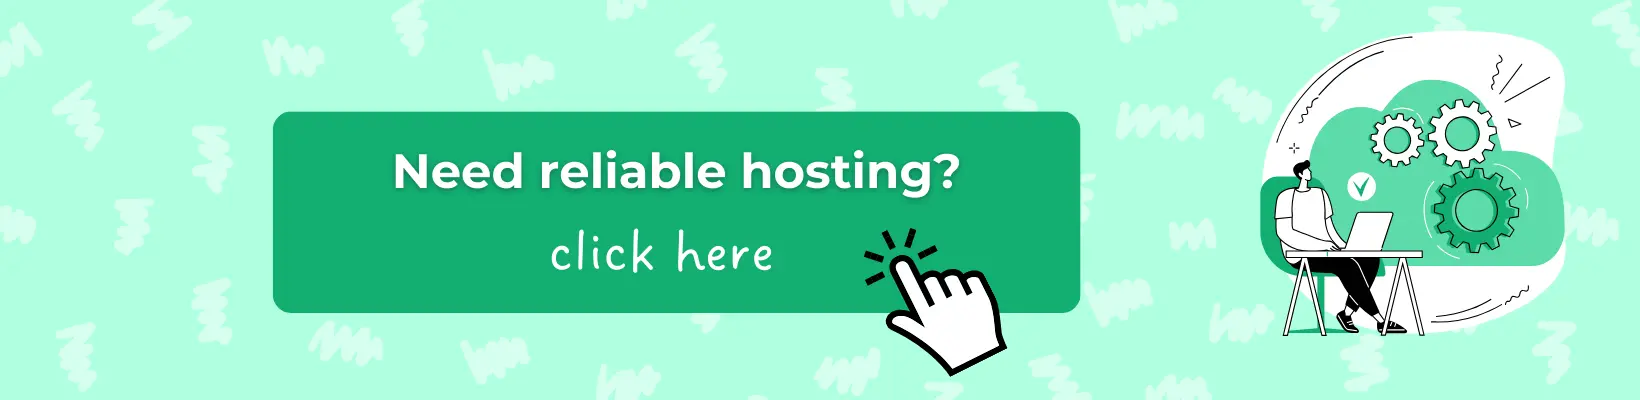 Renting hosting for a website about a game